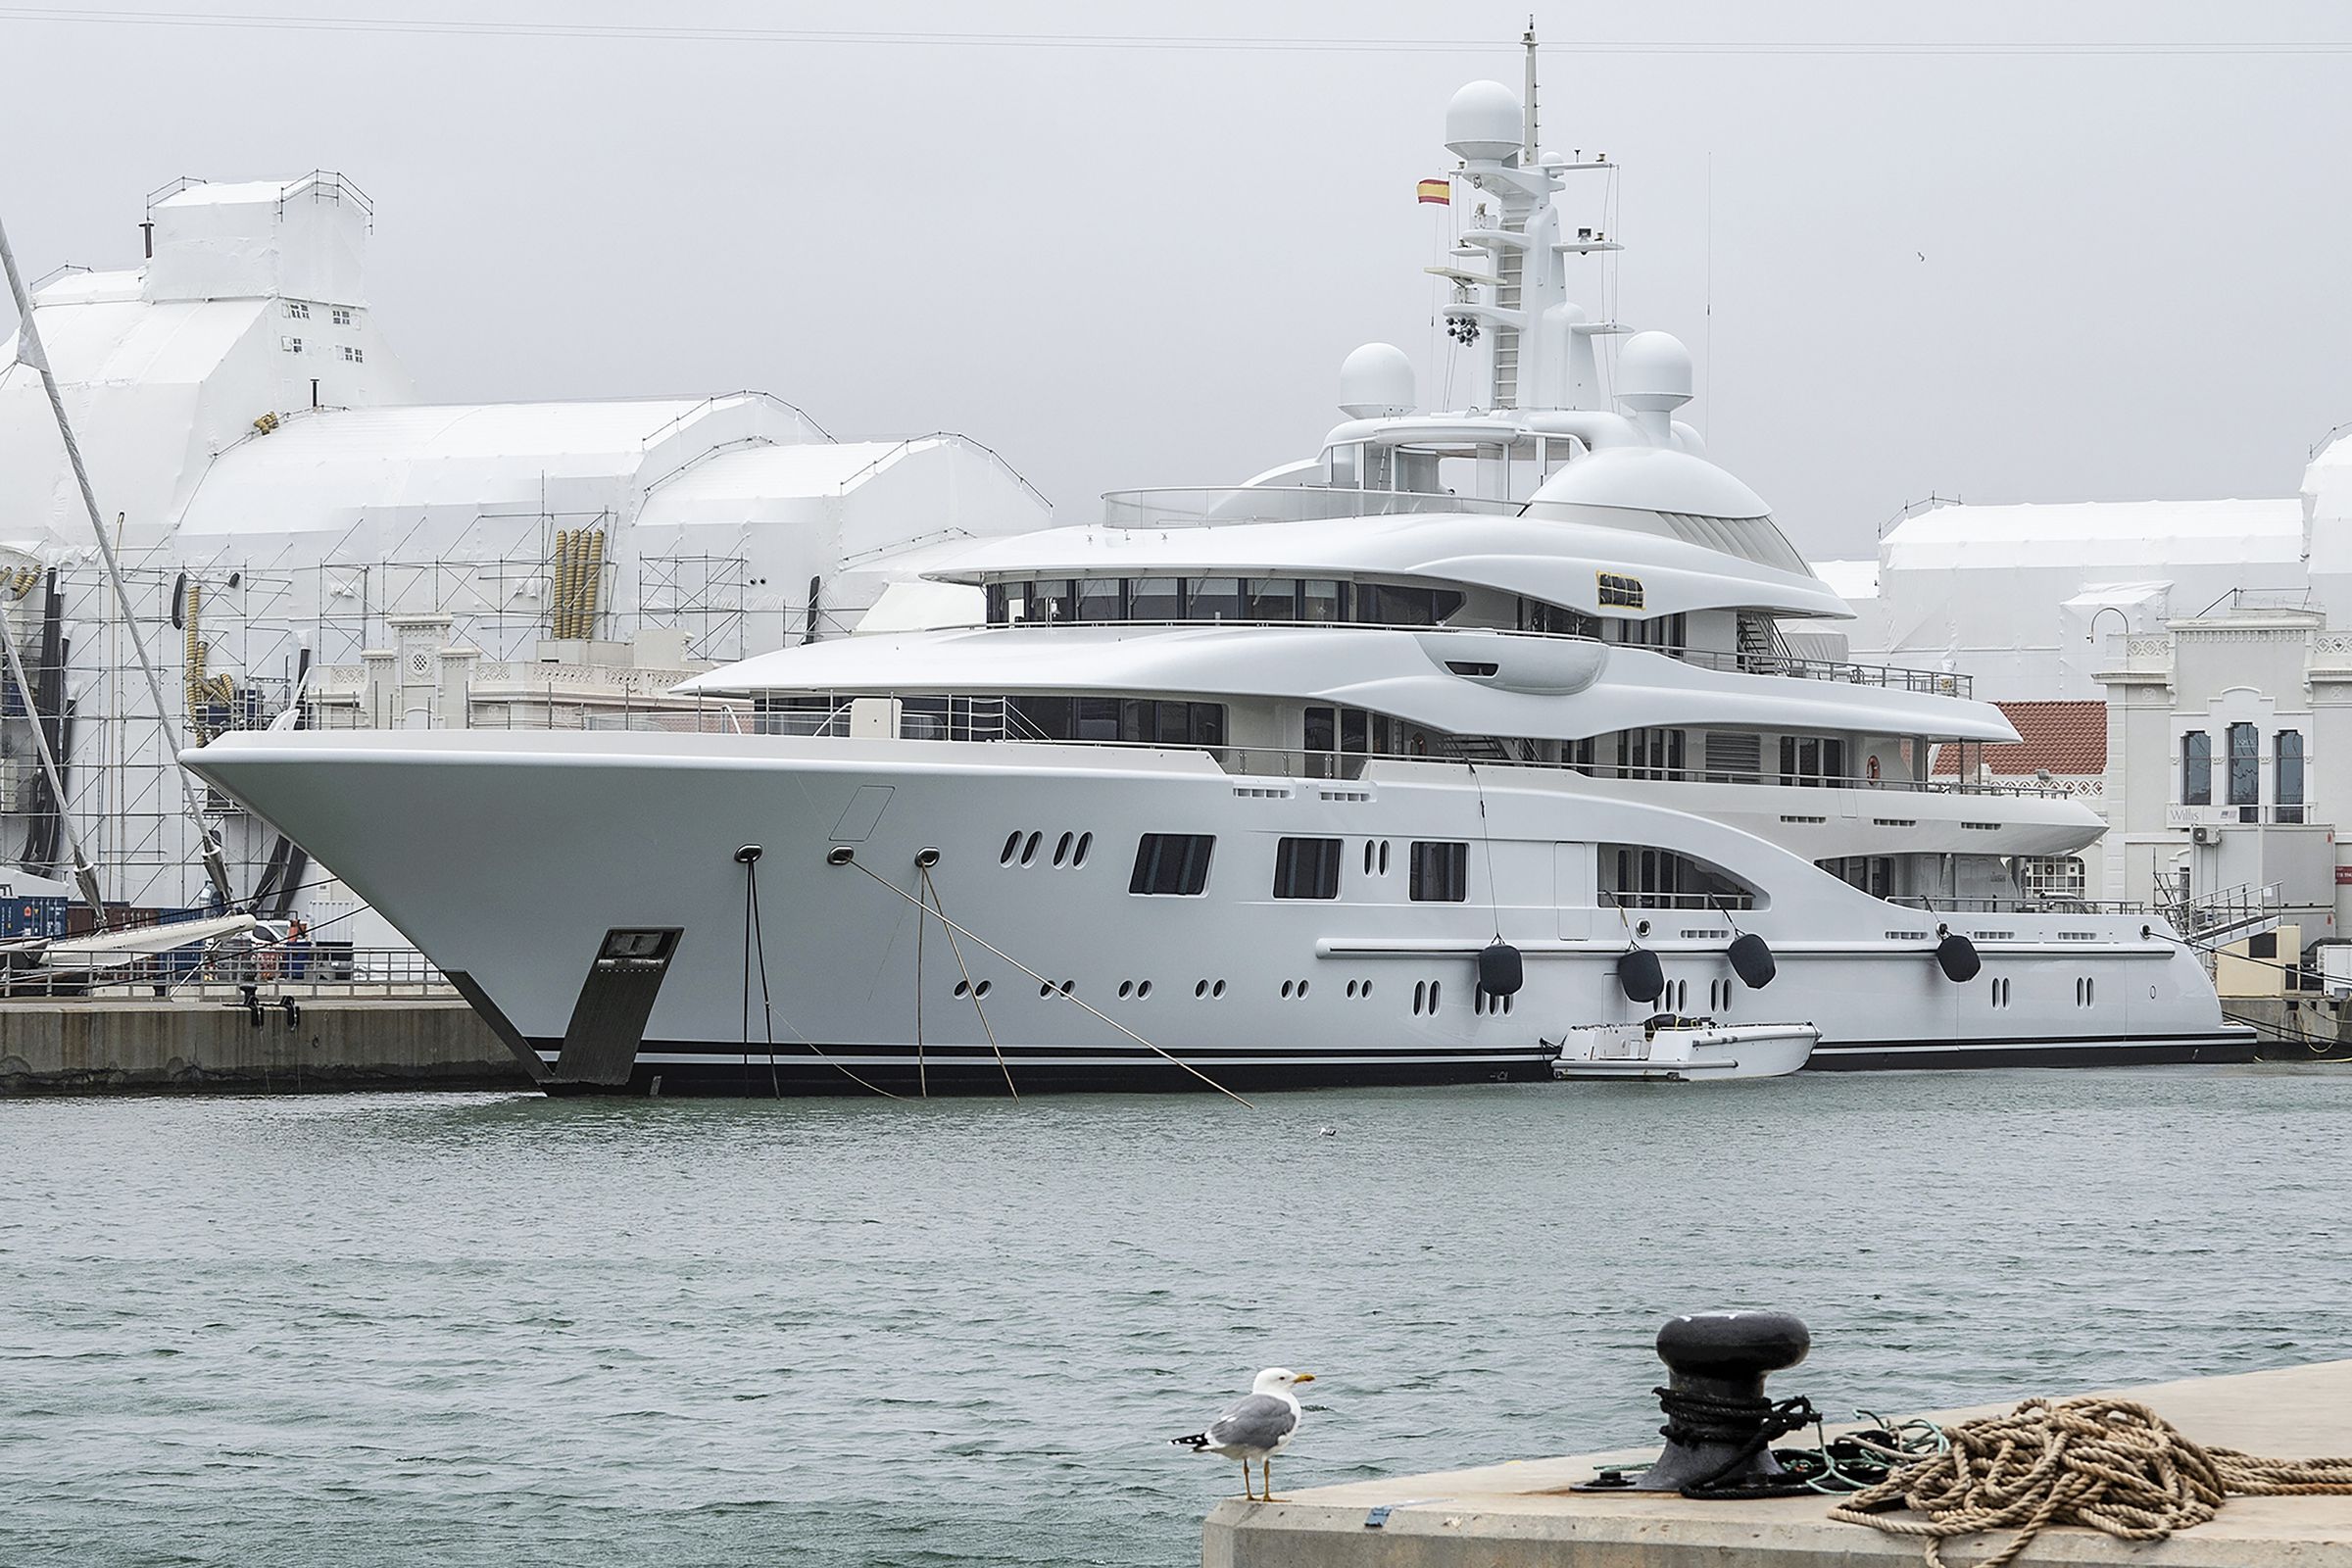 Spain Impounds $154 Million Russian-Owned ‘Valerie’ Superyacht